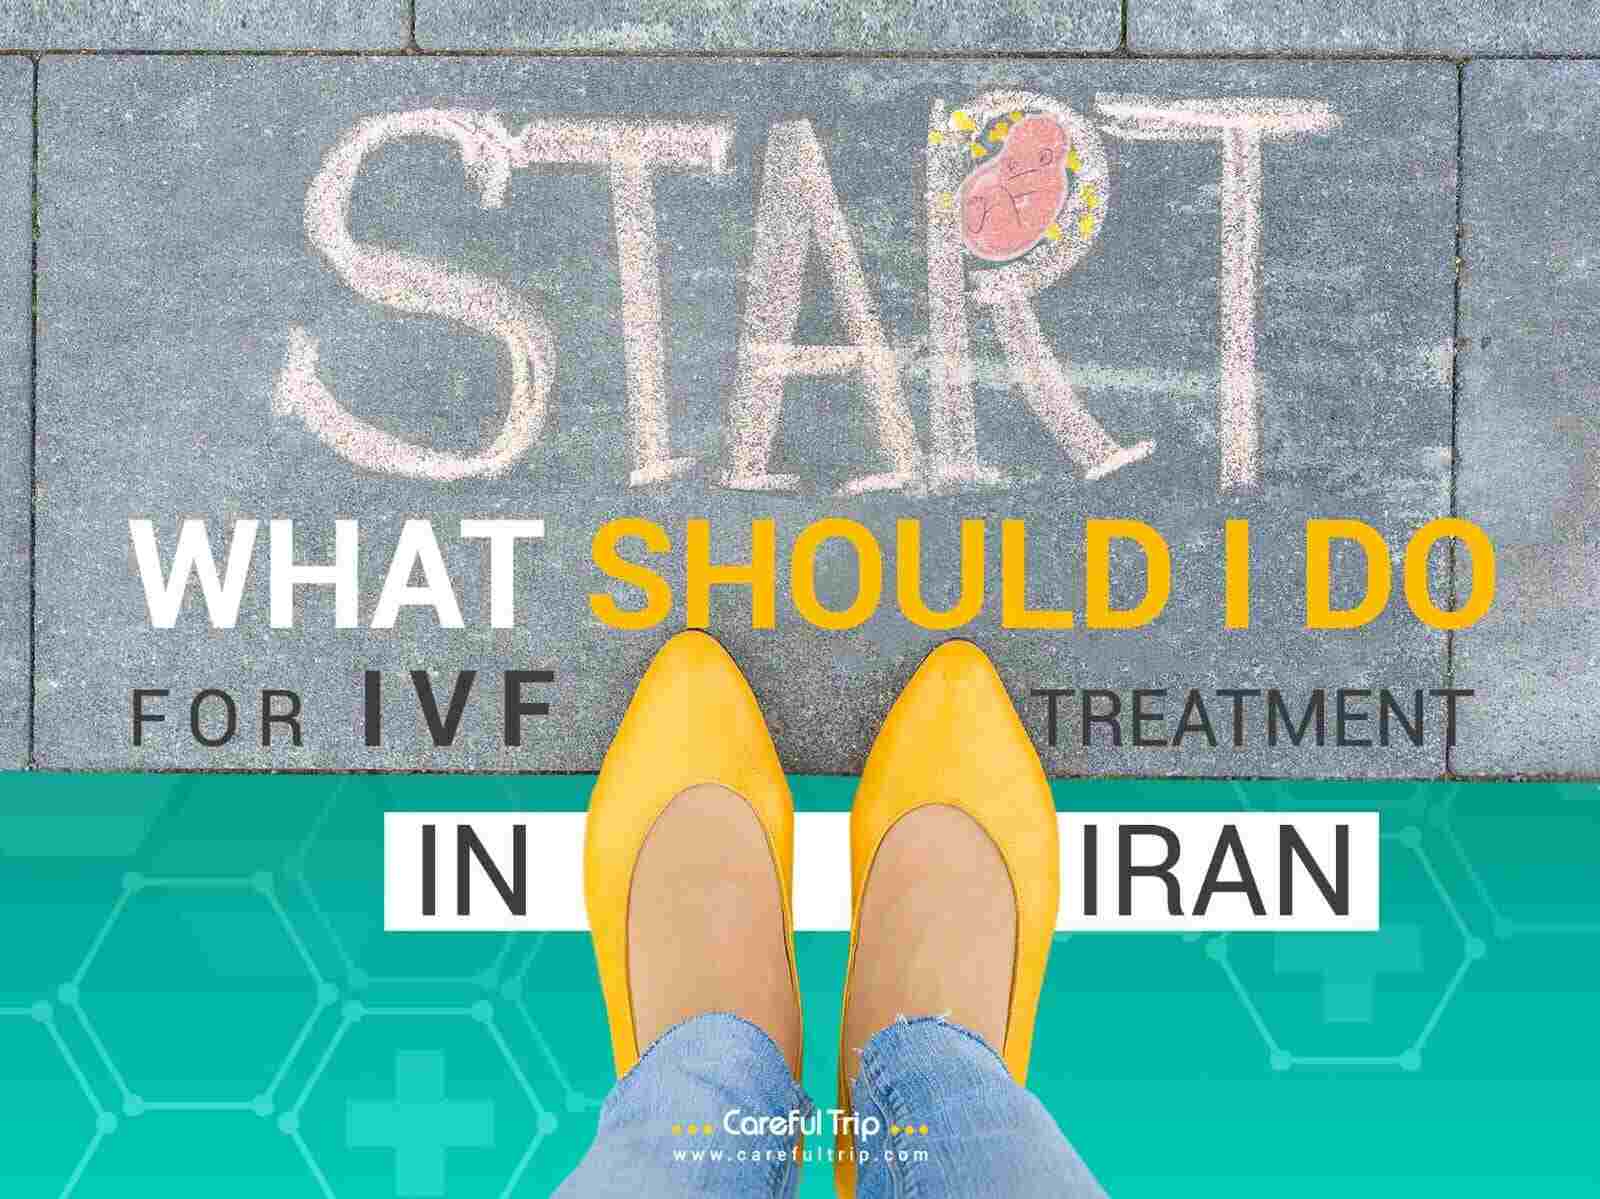 What Should I Do For IVF Treatment in Iran